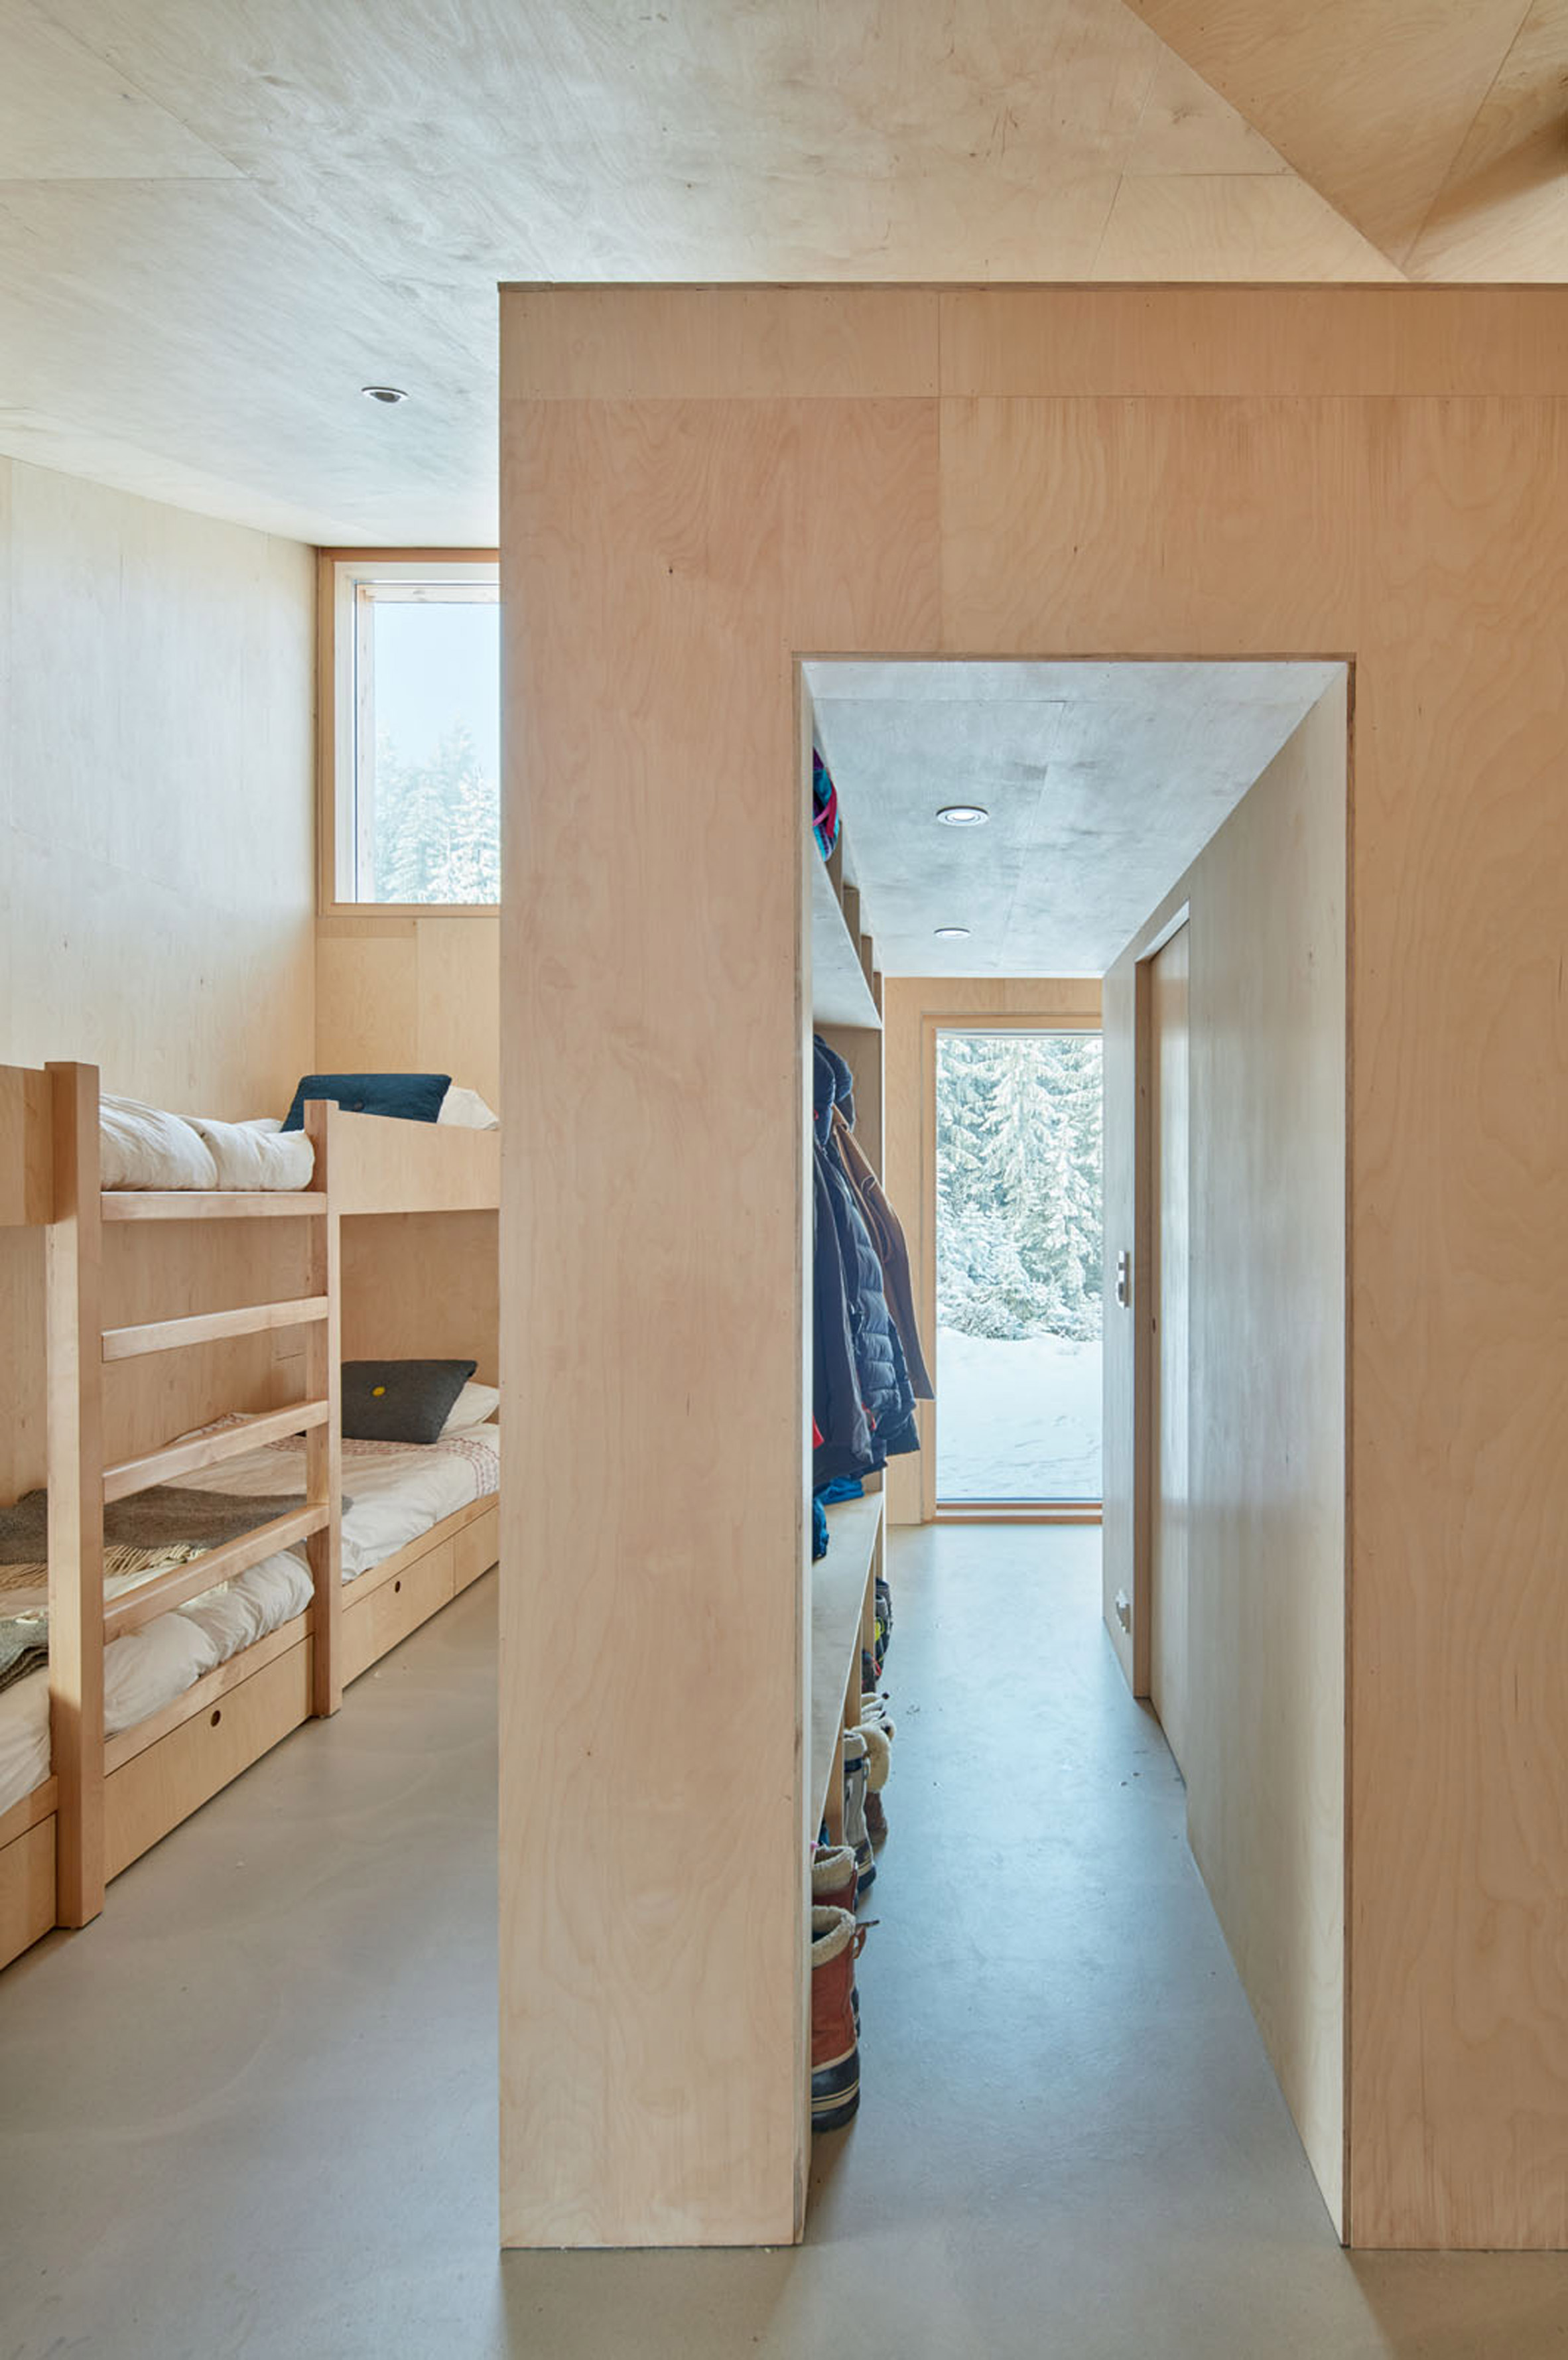 Bunk bed in timber-clad house by Mork-Ulnes Architects